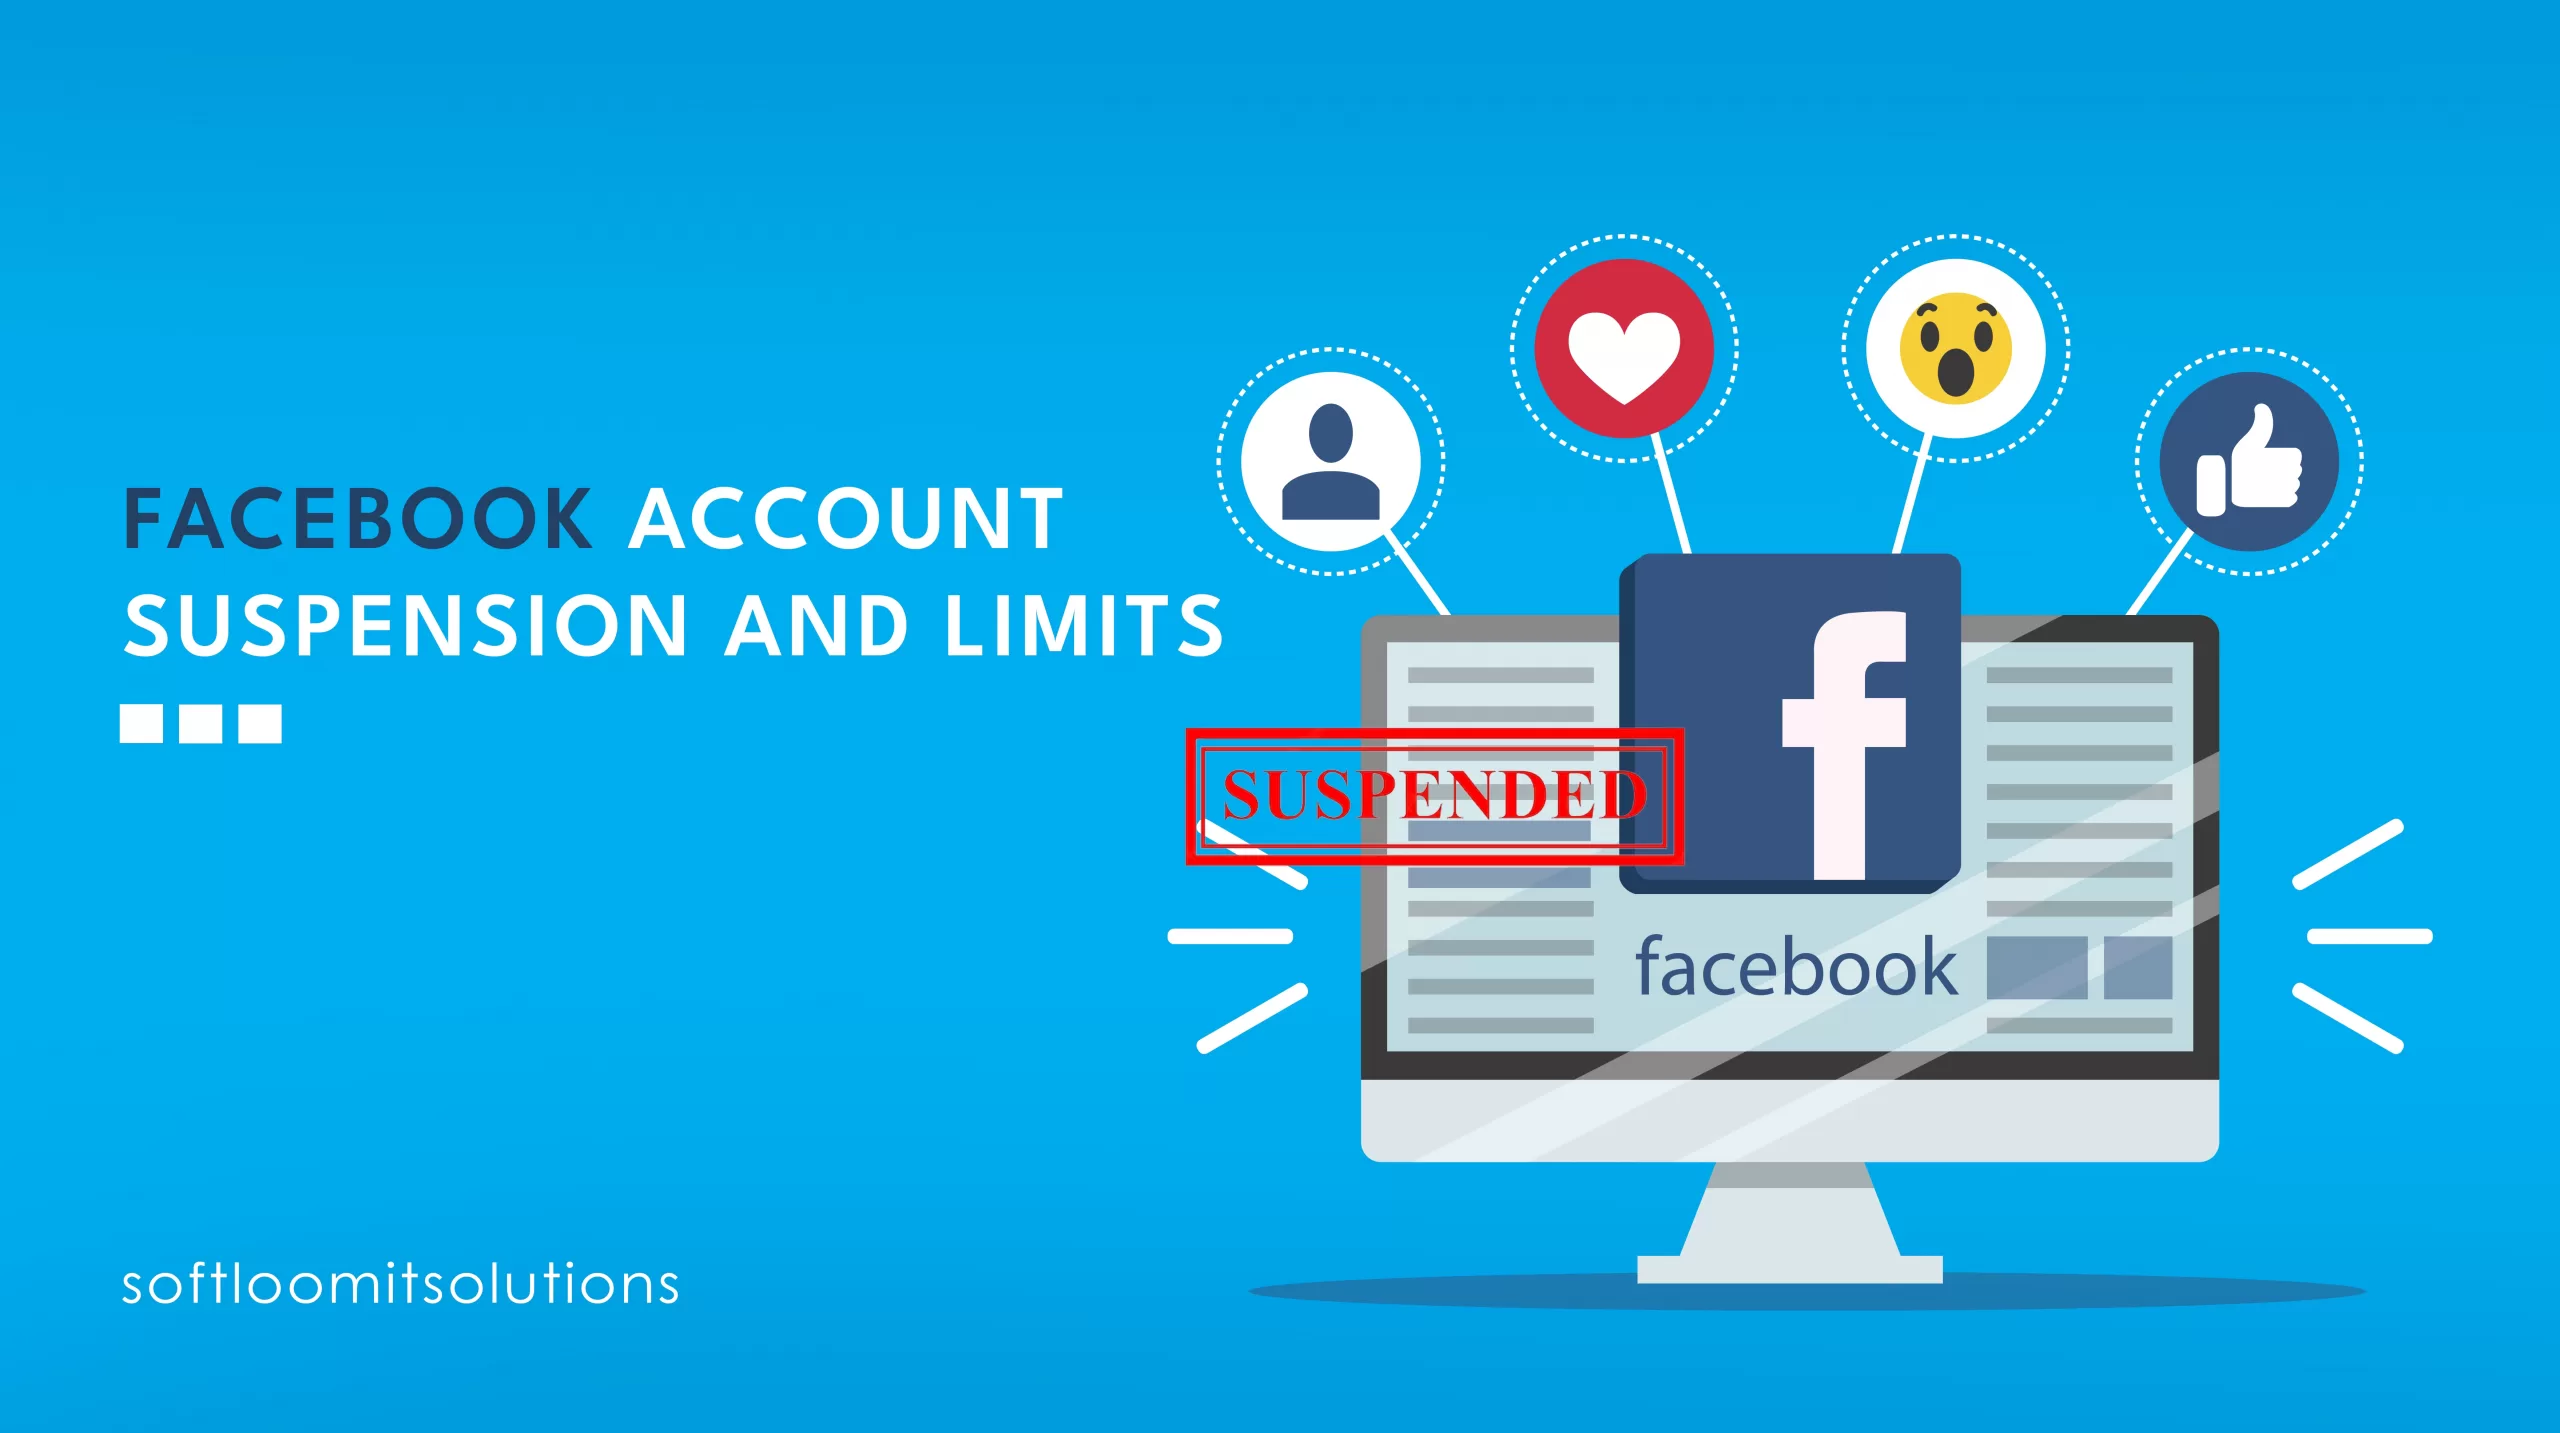 Facebook Account Suspension and Limits